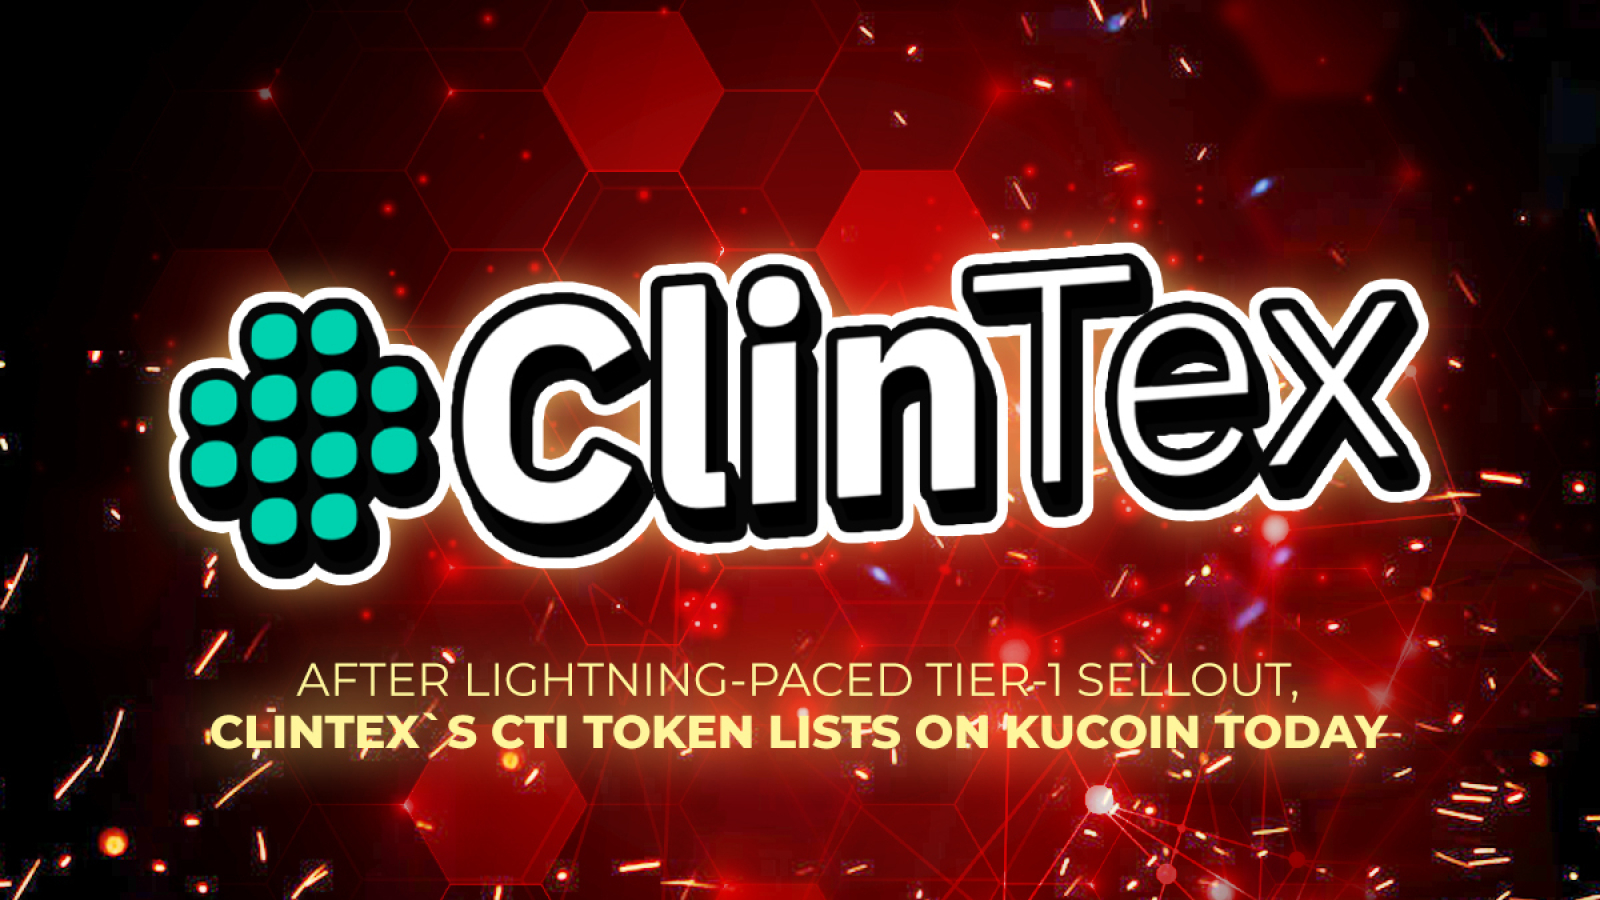 After Lightning-Paced Tier-1 Sellout, ClinTex’s CTi Token Lists on KuCoin Today